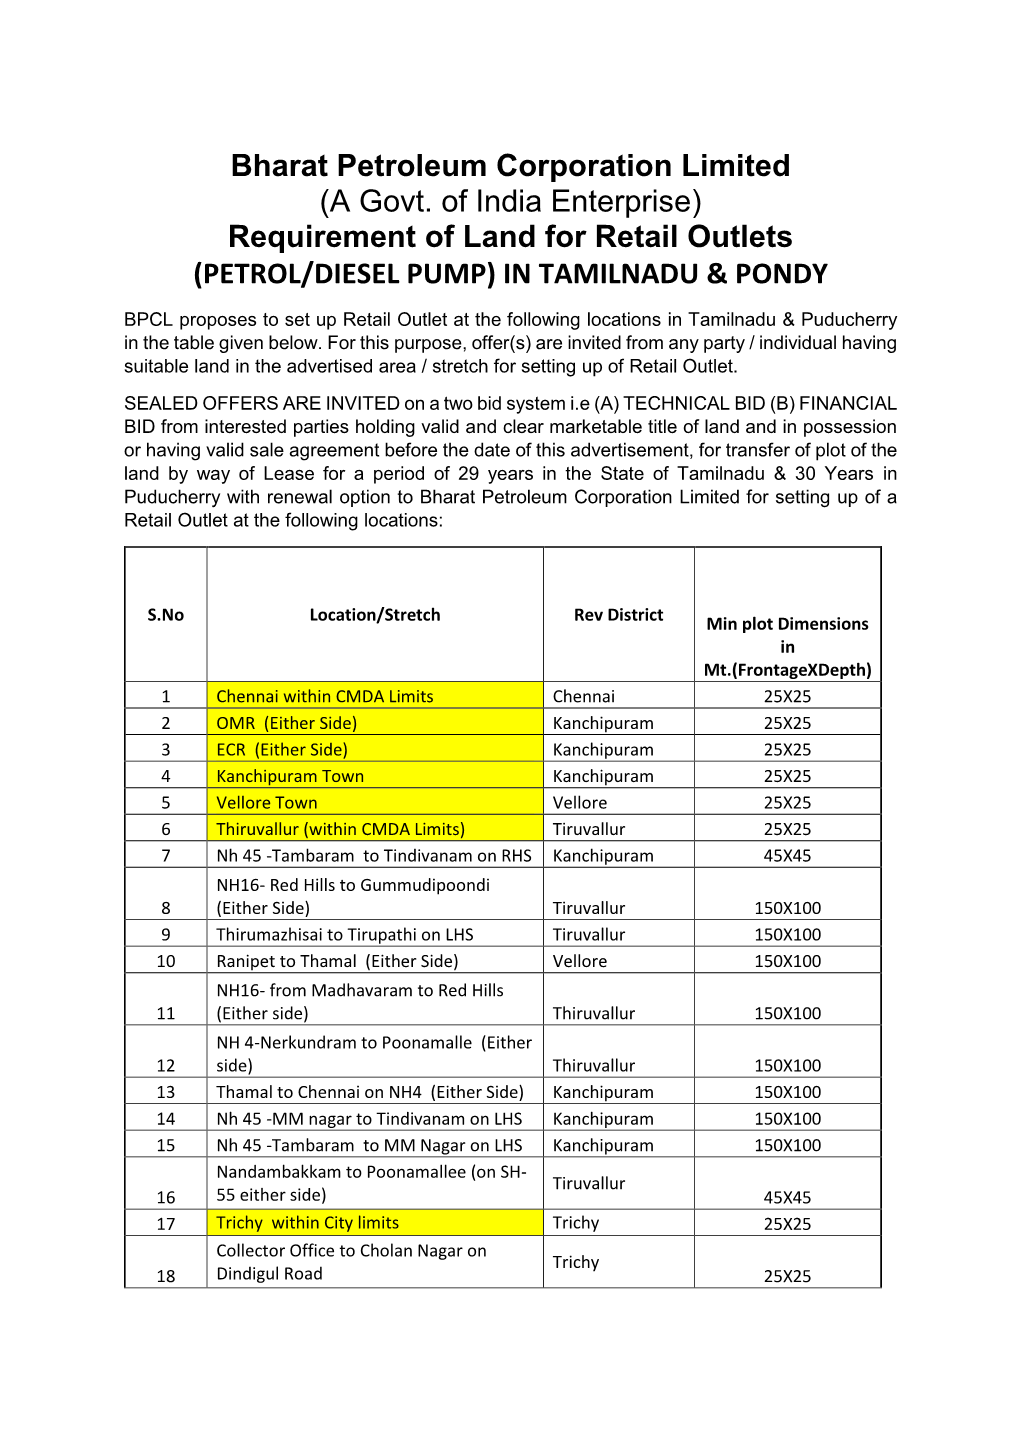 Requirement of Land for Retail Outlets (PETROL/DIESEL PUMP) in TAMILNADU & PONDY